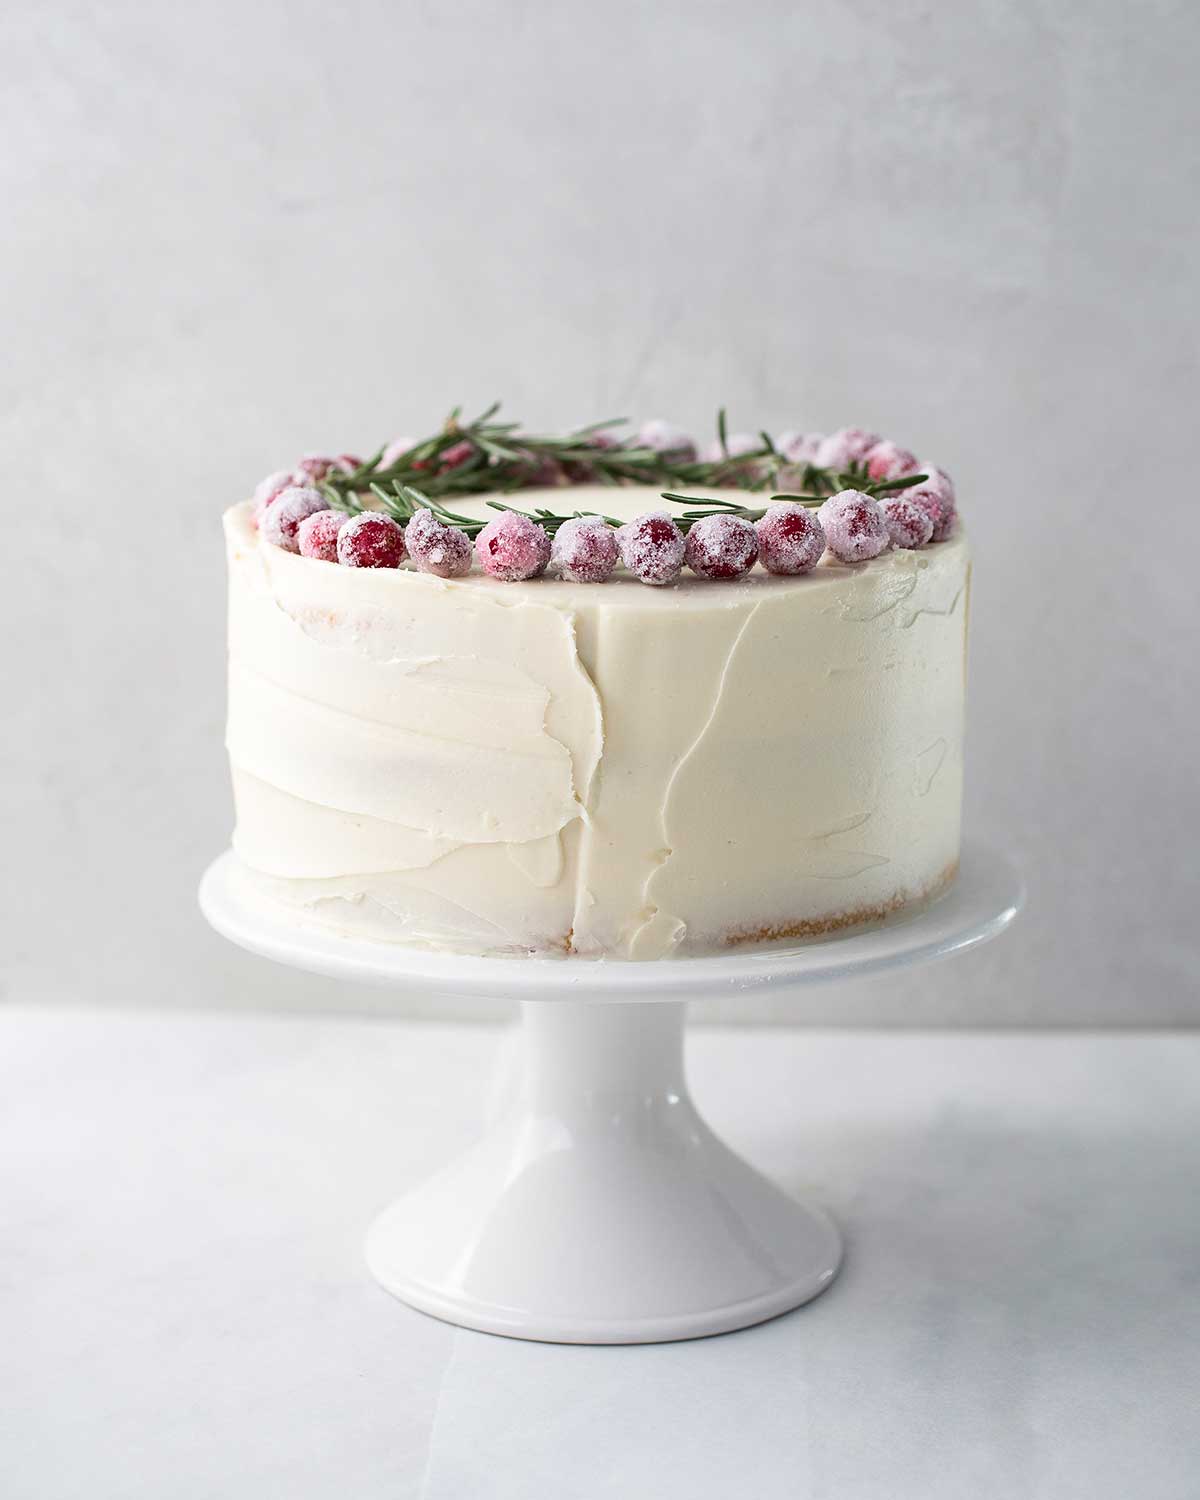 A frosted cake on a cake stand, topped with sugared cranberries and rosemary sprigs.